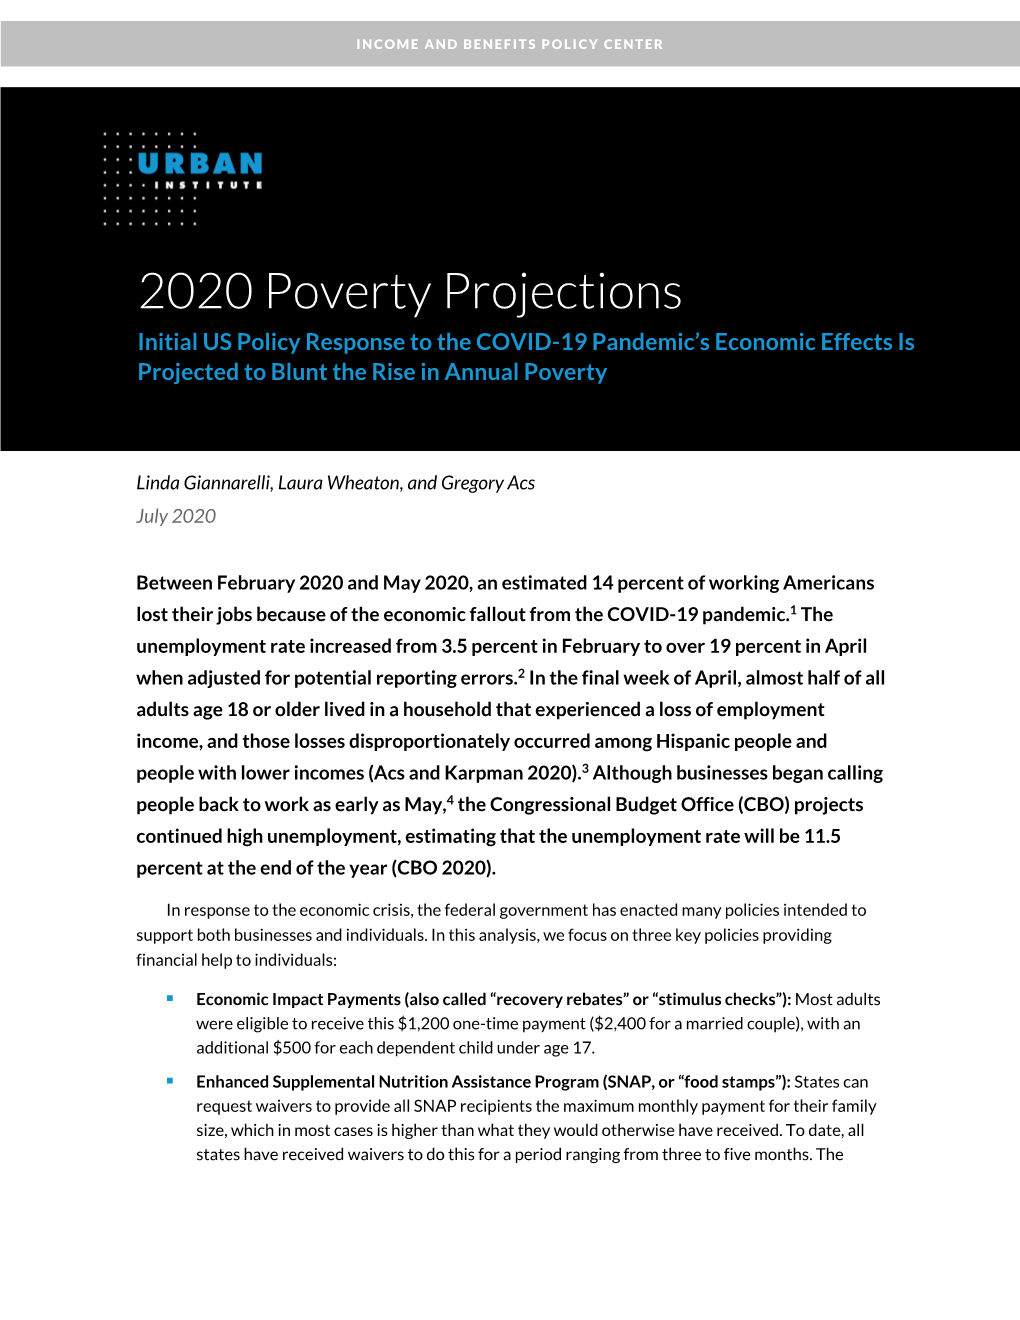 2020 Poverty Projections Initial US Policy Response to the COVID-19 Pandemic’S Economic Effects Is Projected to Blunt the Rise in Annual Poverty